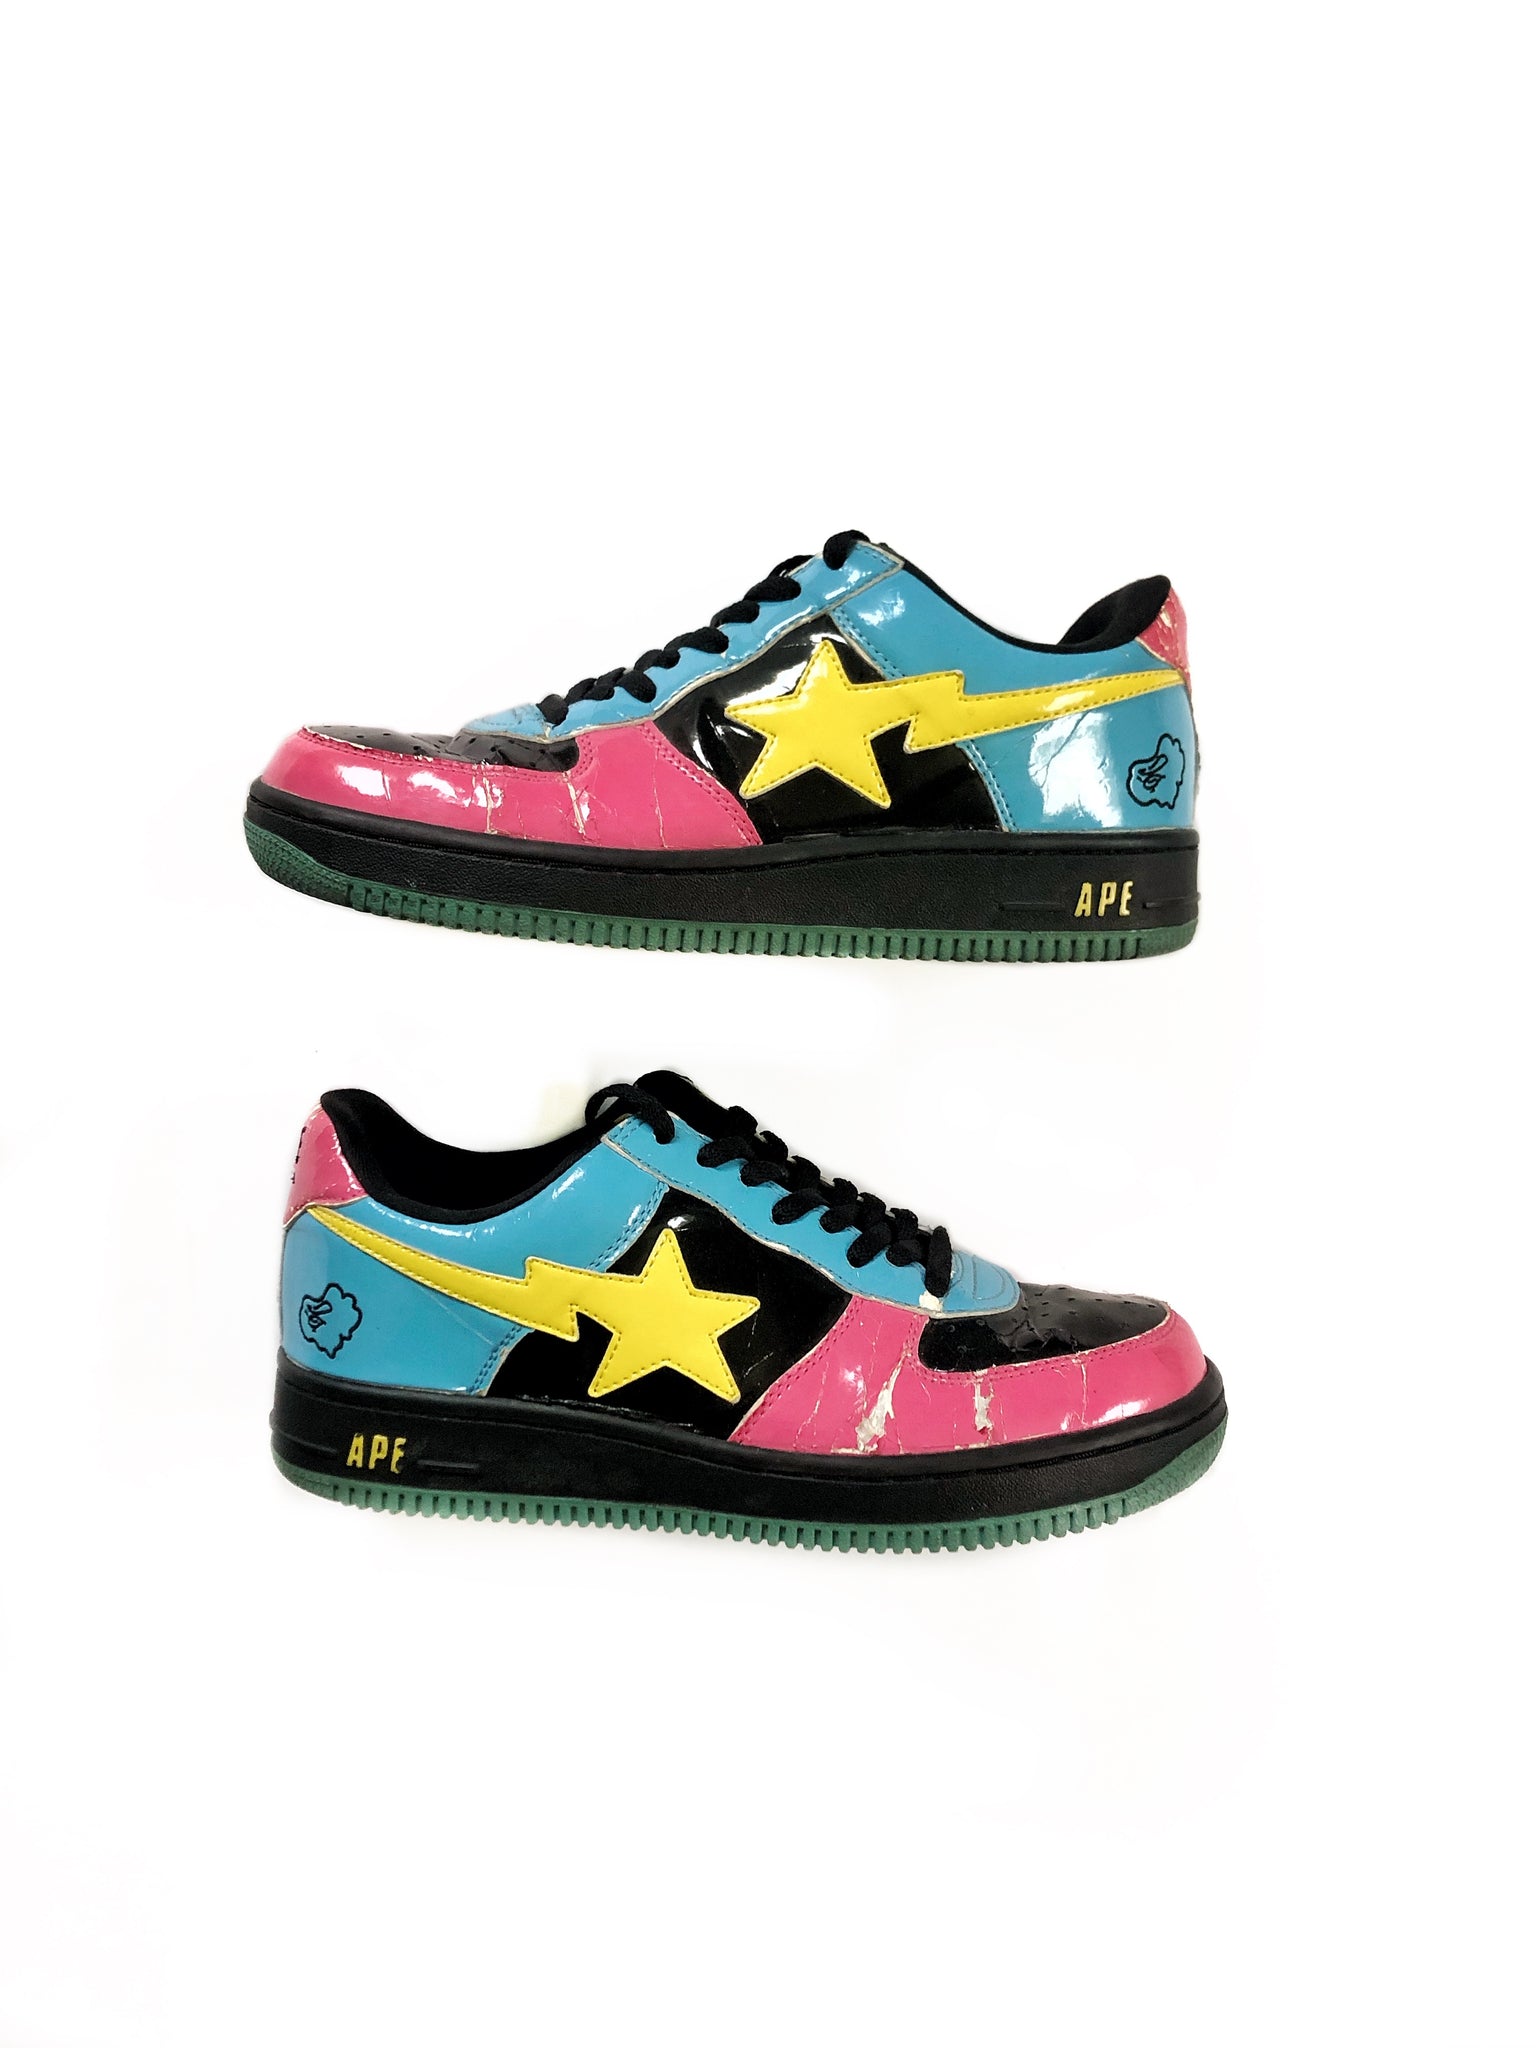 2000's Candy Bapesta – Archive Reloaded